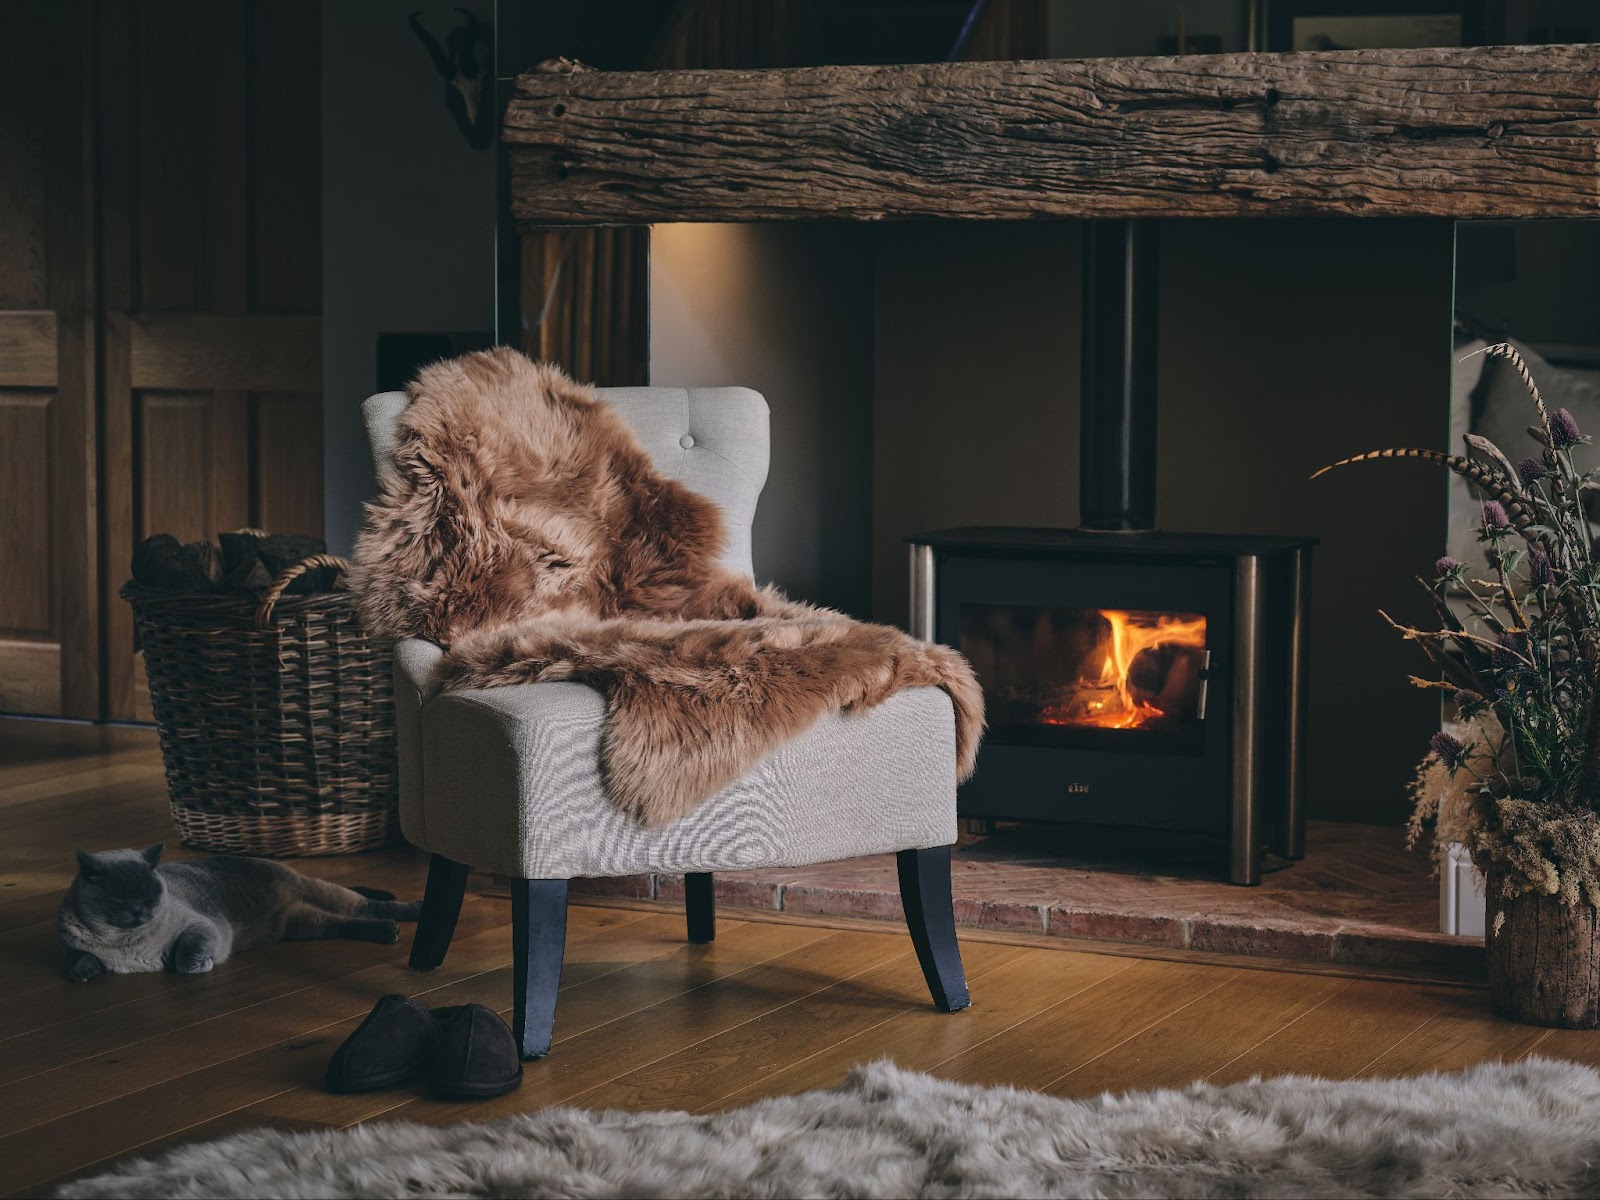 A cosy man cave, focused on a chair with a honey coloured sheepskin rug on it, wood stove burning in the background